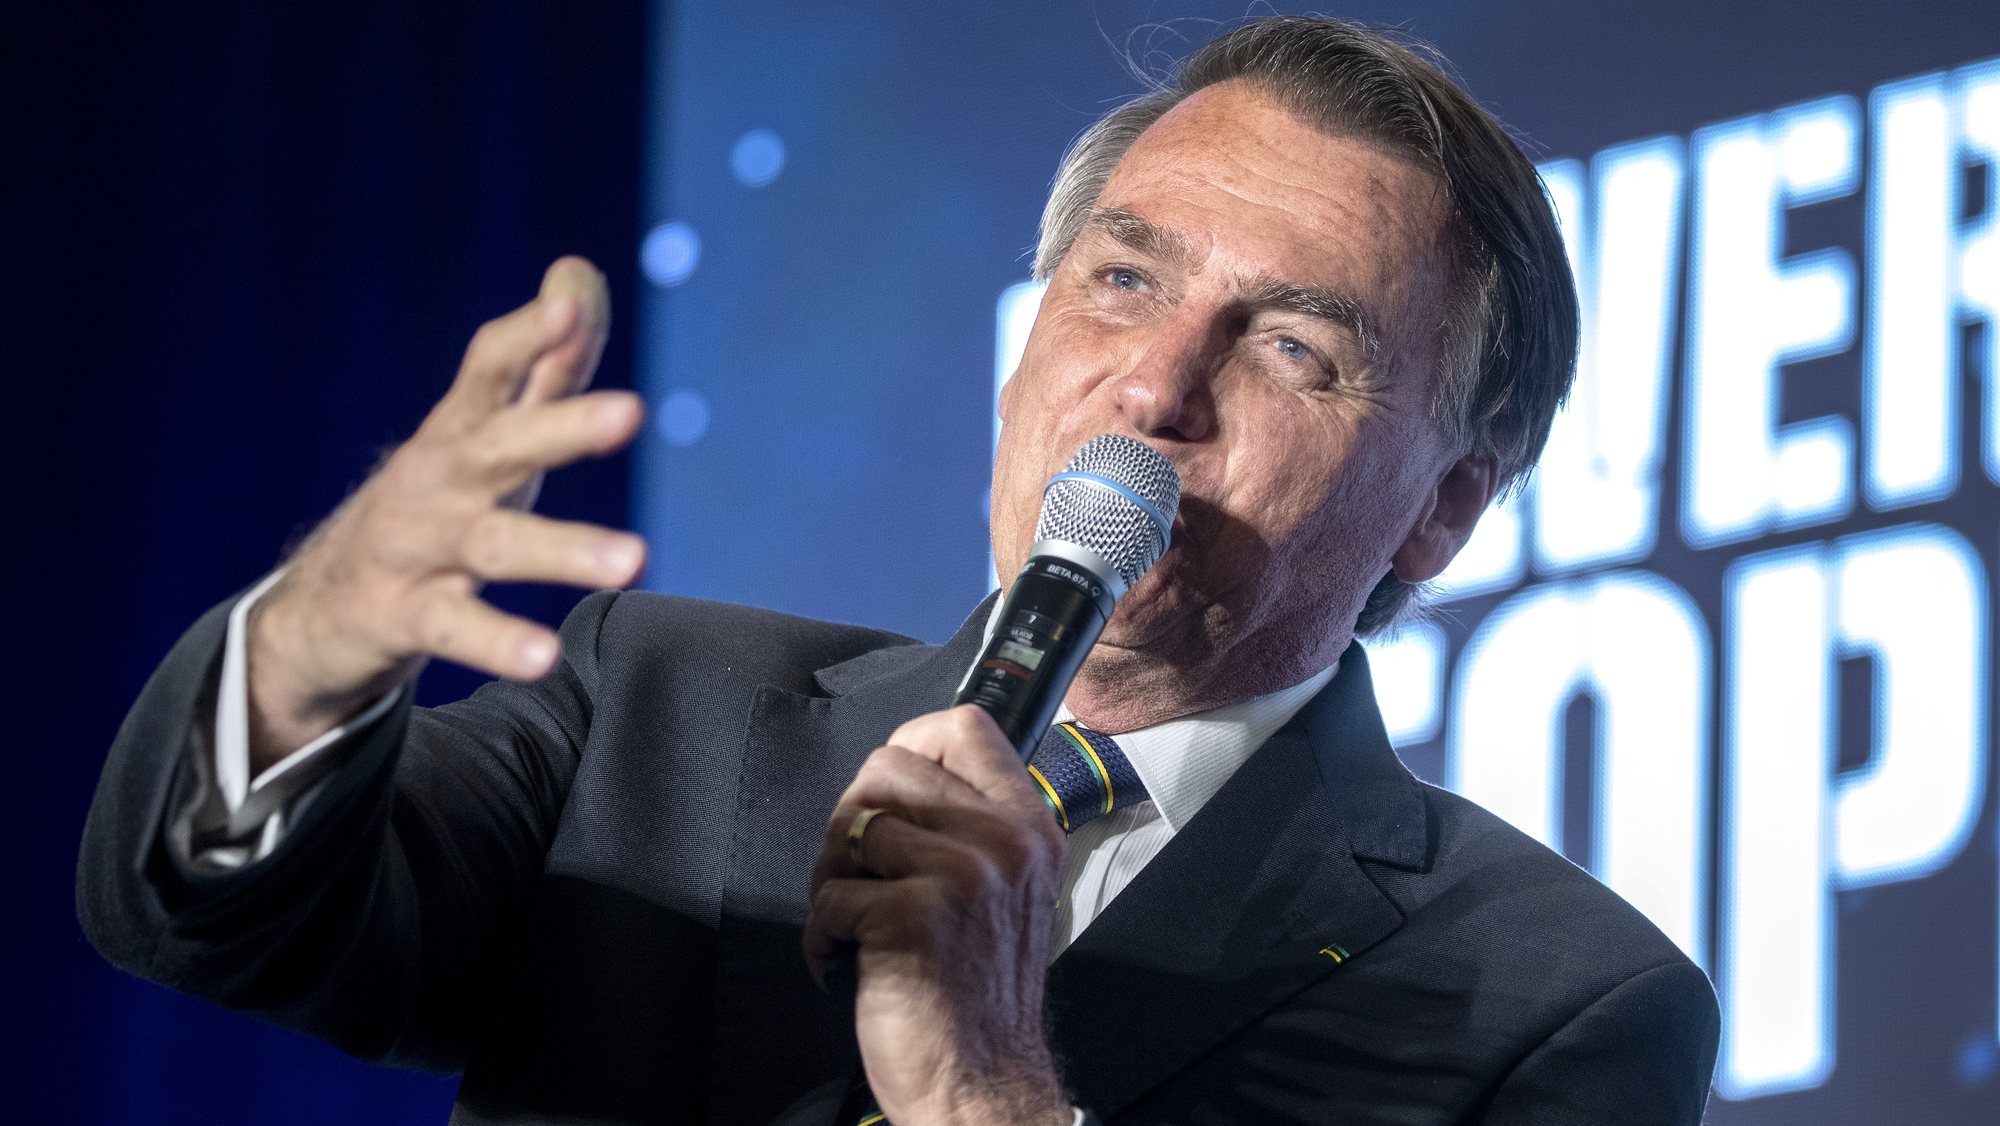 epa10446297 Former Brazil President Jair Bolsonaro attends the &#039;Power of the People&#039; event at the Trump National Doral Miami, in Miami, Florida, USA, 03 February 2023. The event was hosted by Turning Point USA, a non-profit organization founded in 2012. According to the event organizers, it was Bolsonaro&#039;s first public event following the recent Brazilian elections.  EPA/CRISTOBAL HERRERA-ULASHKEVICH